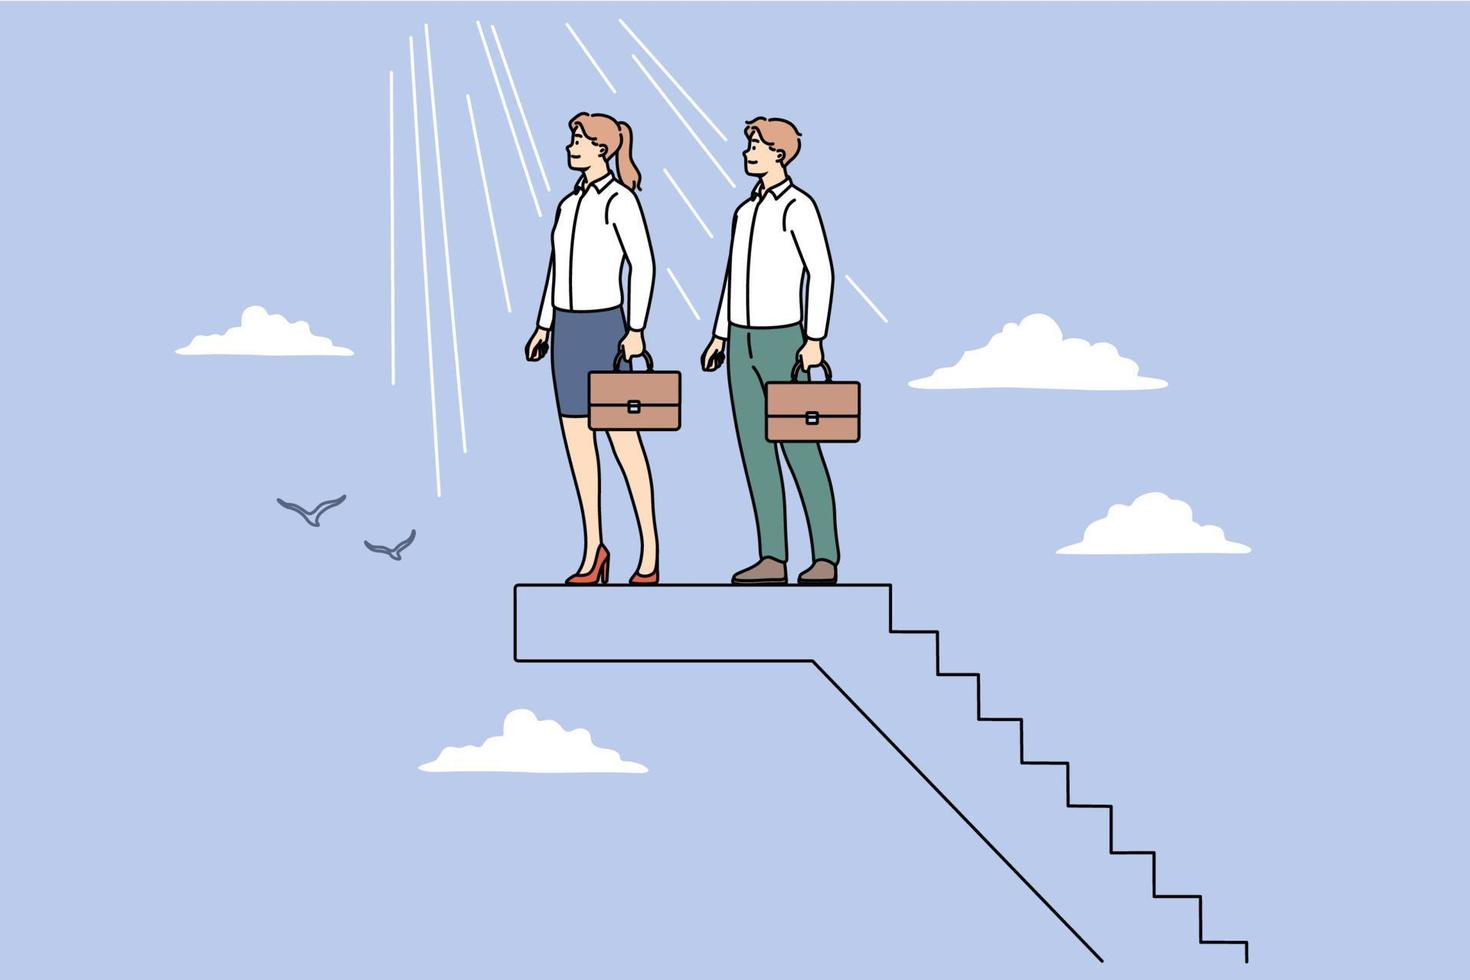 Teamwork business success and collaboration concept. Man and woman partners colleagues teammates standing together on ladder looking in one direction feeling successful vector illustration